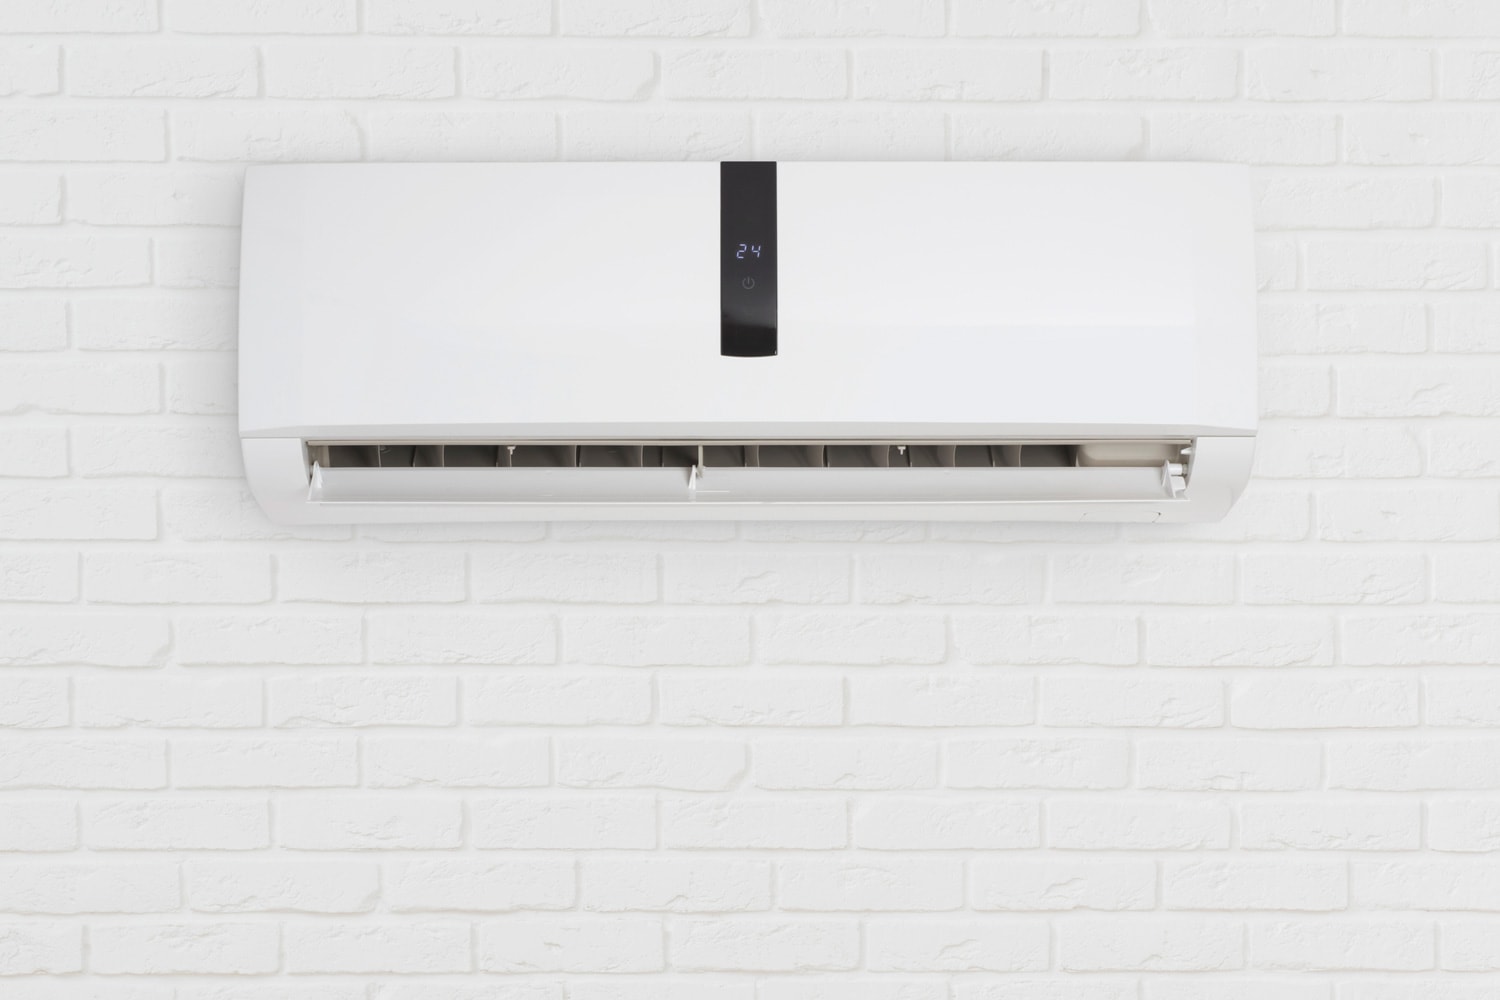 Split system air conditioning unit on decorative white brick wall